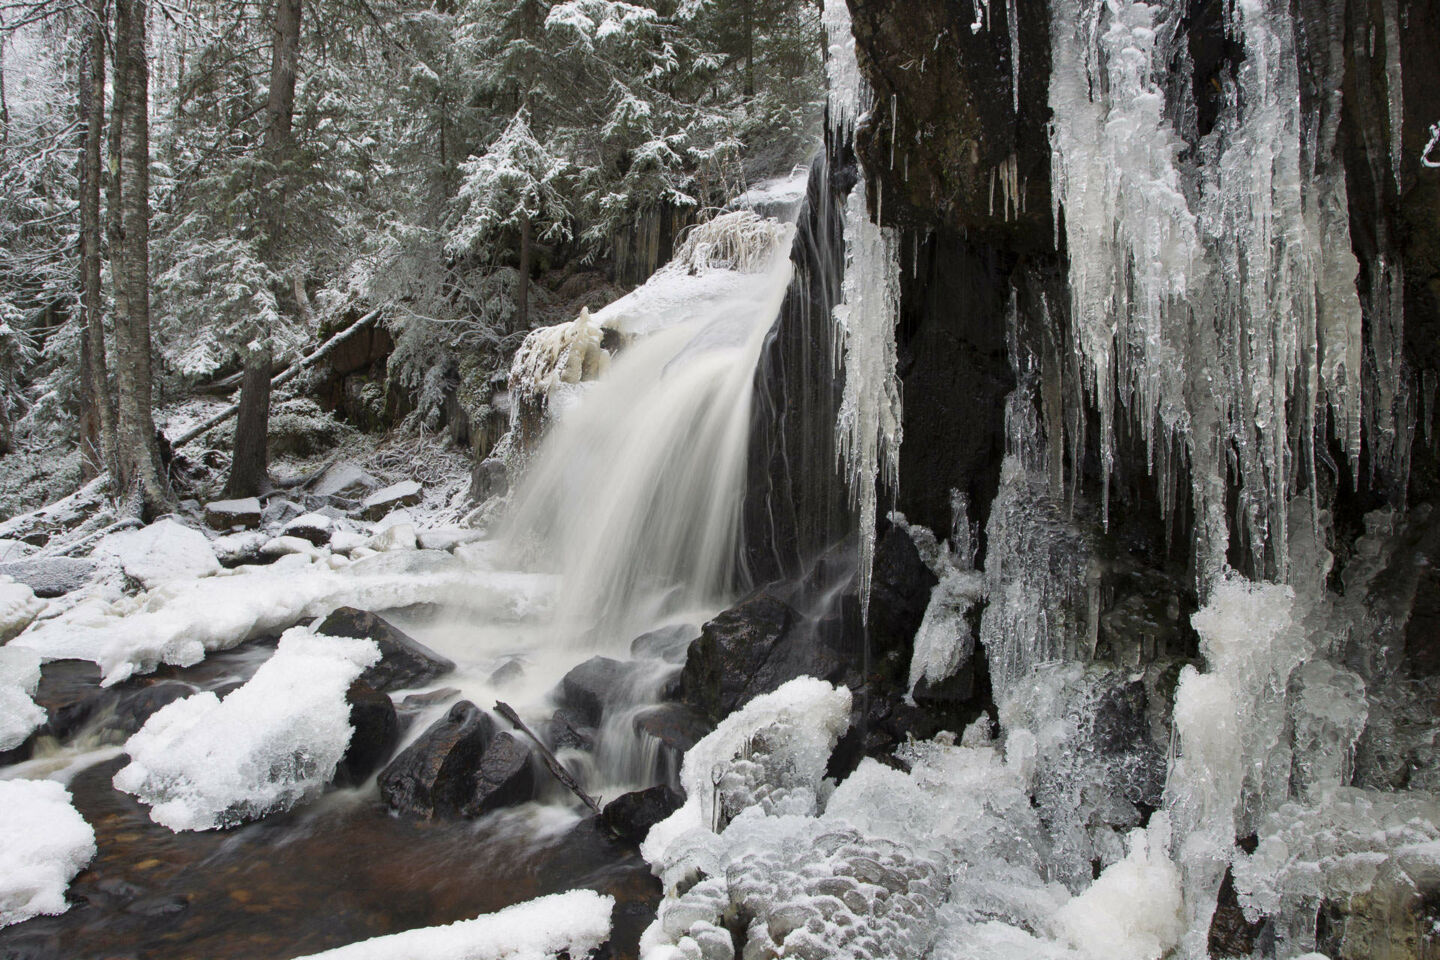 Frozen waterfall at the Korouoma Canyon in Posio, a Finnish Lapland filming location